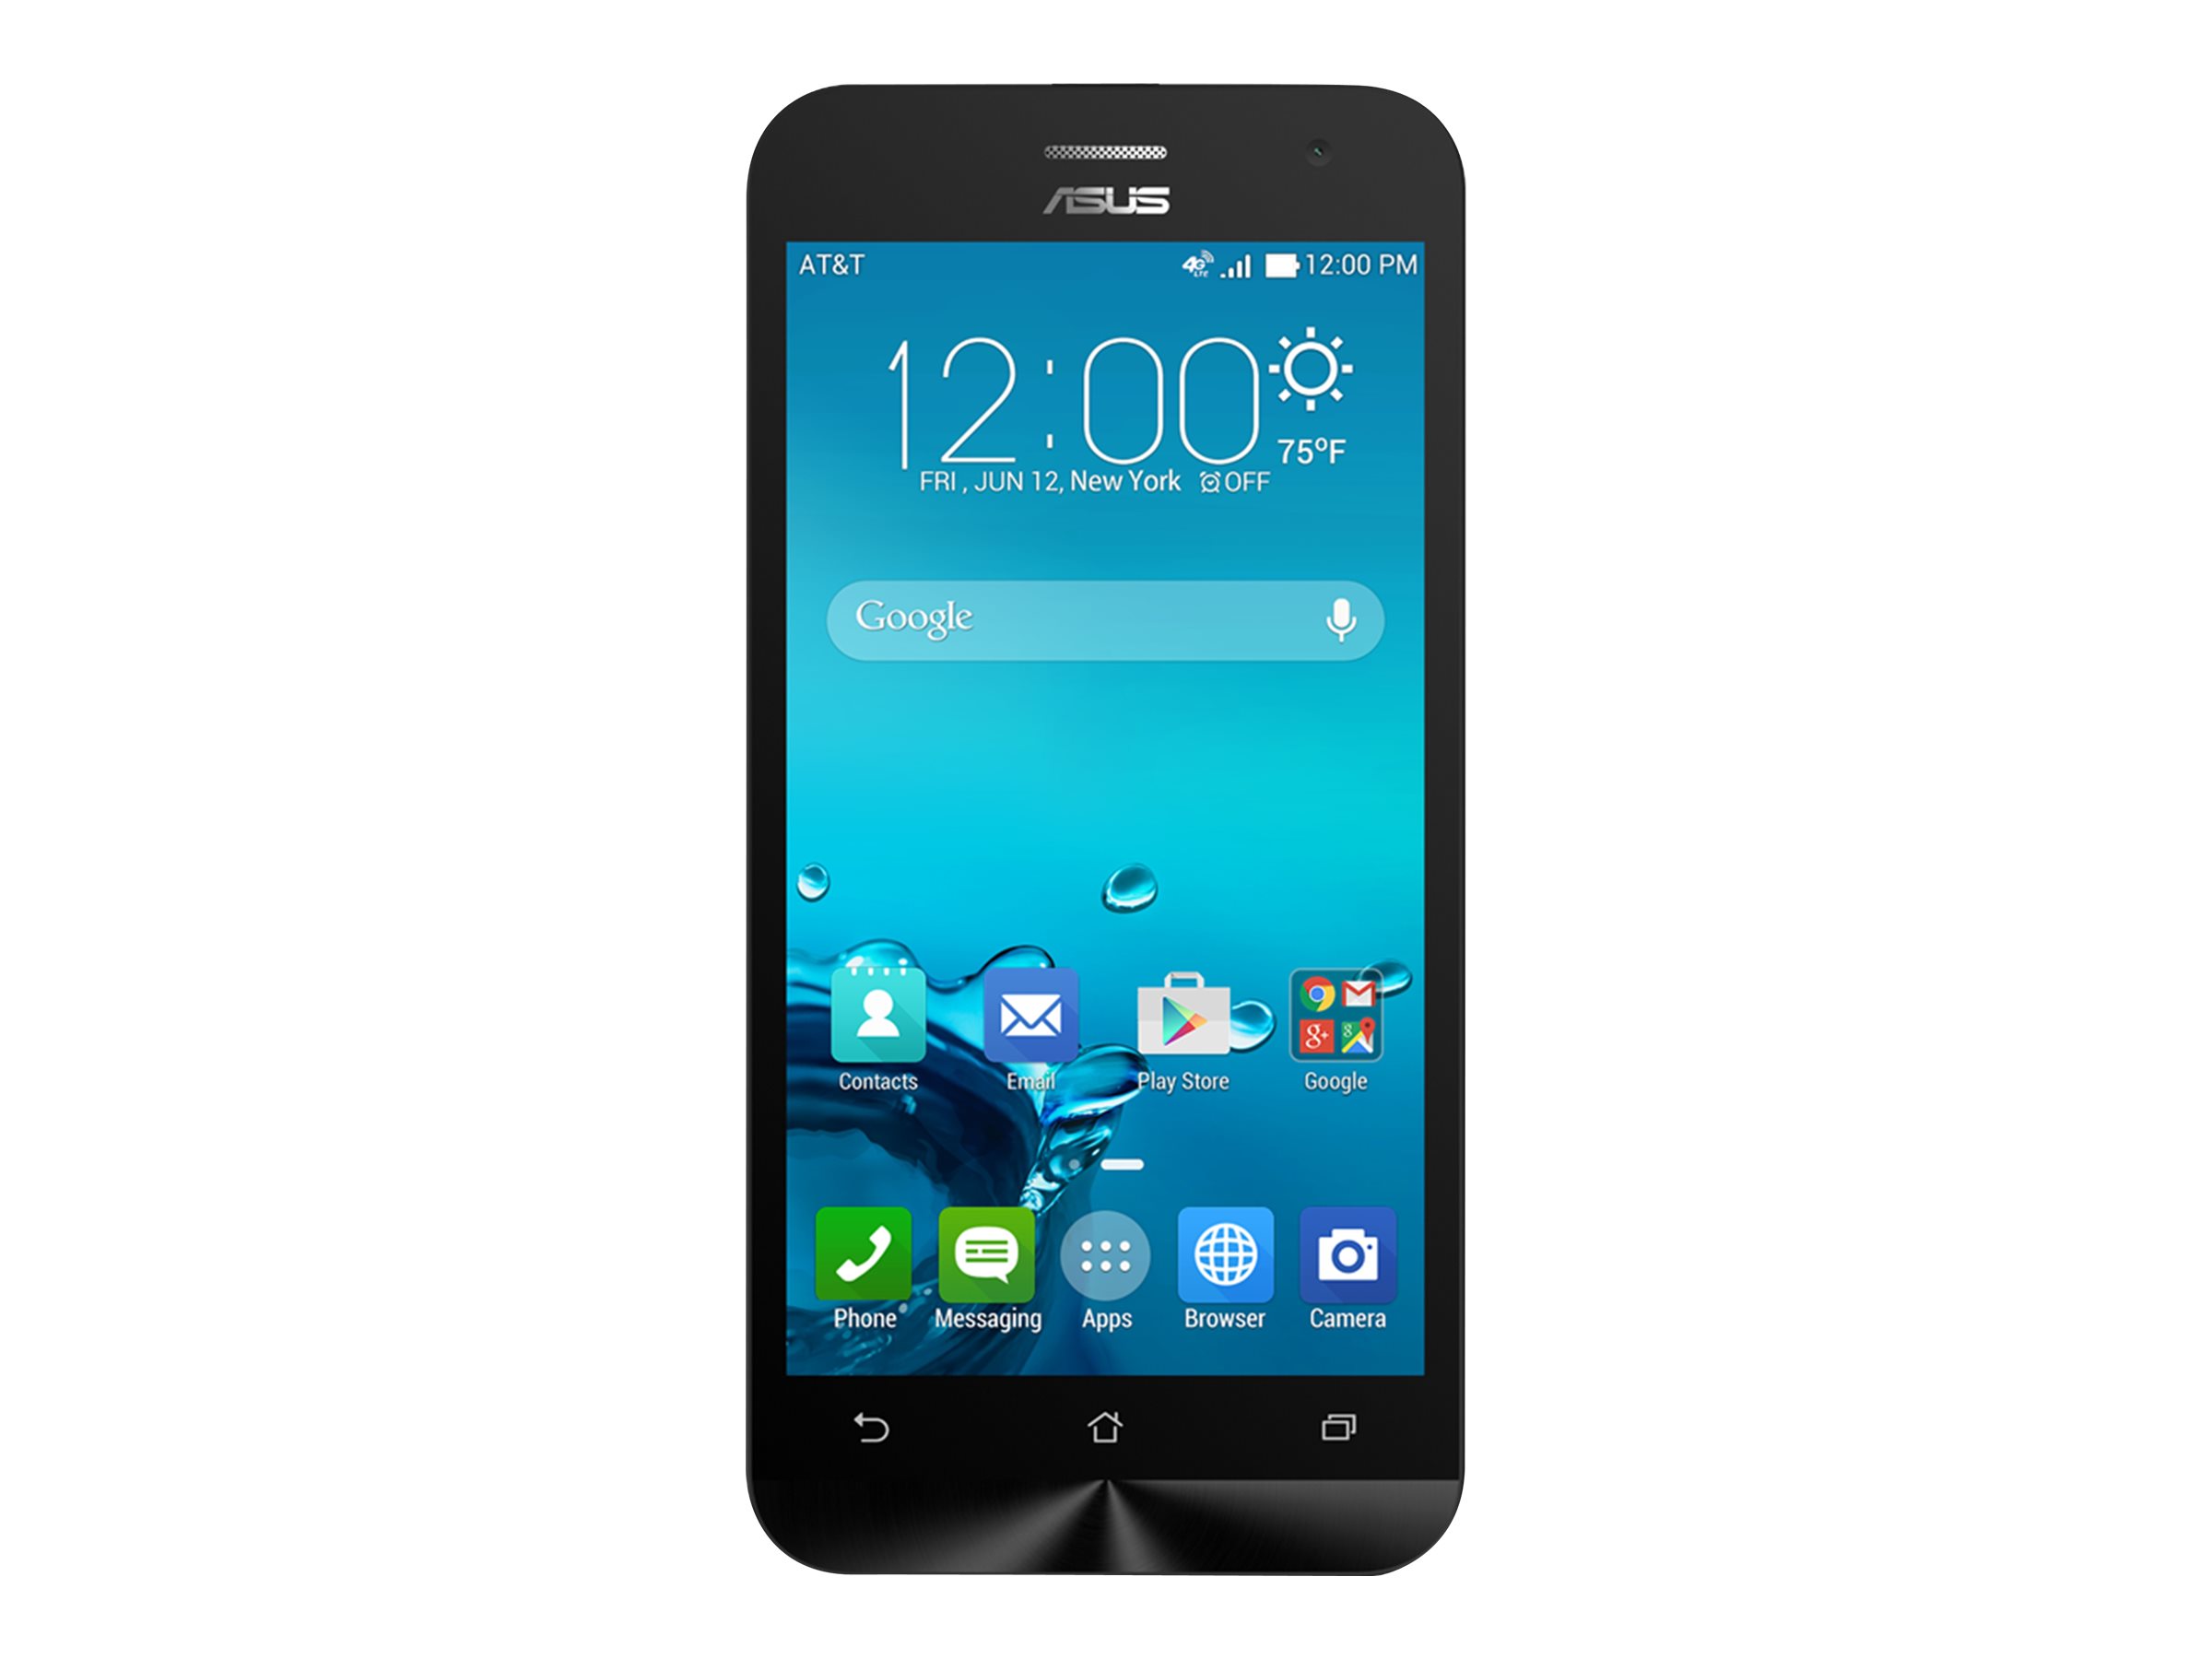 AT&T ASUS Zenfone 2E (AT&T Go Phone) No Annual Contract - image 1 of 14